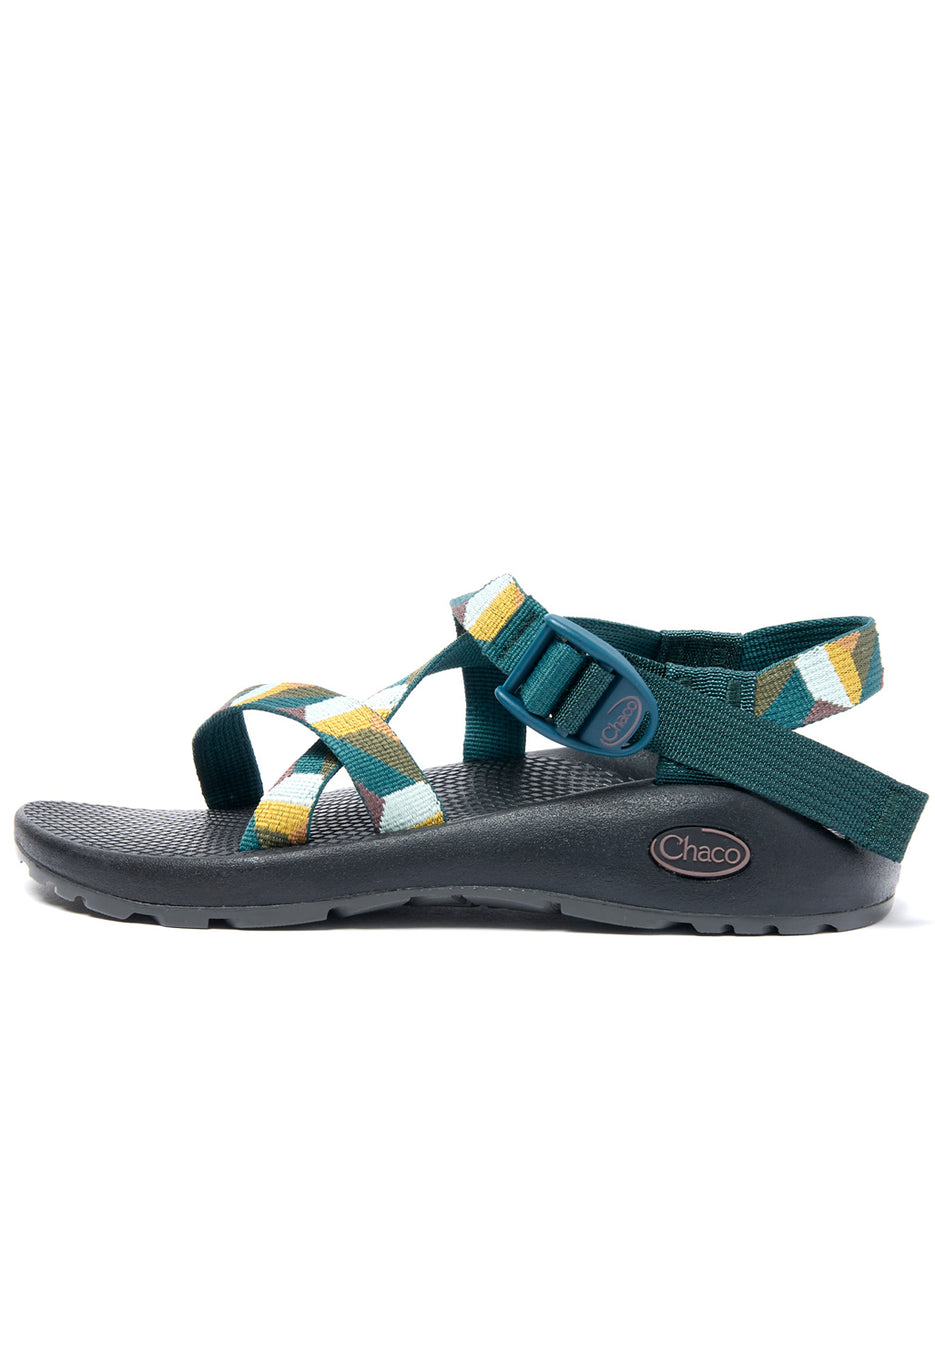 Chaco Women's Z1 Classic Sandals - Inlay Moss